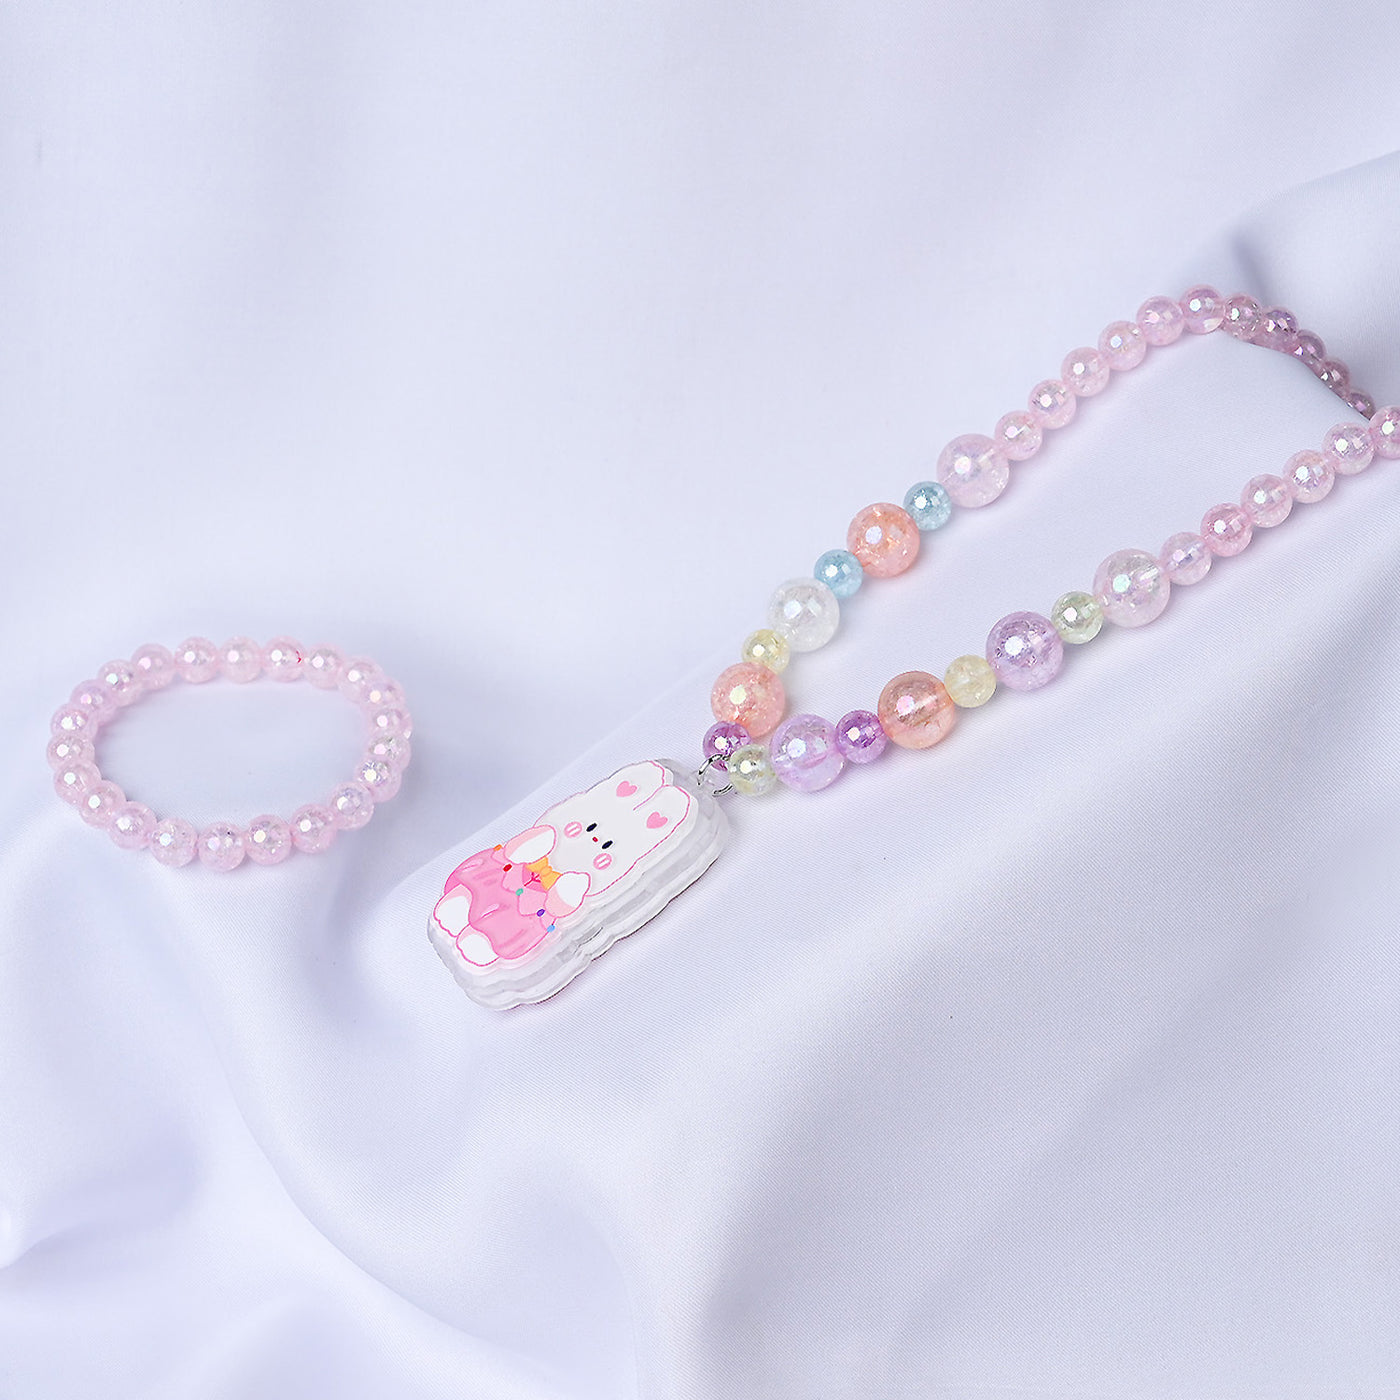 NECKLACE AND BRACELET FOR BABY GIRL